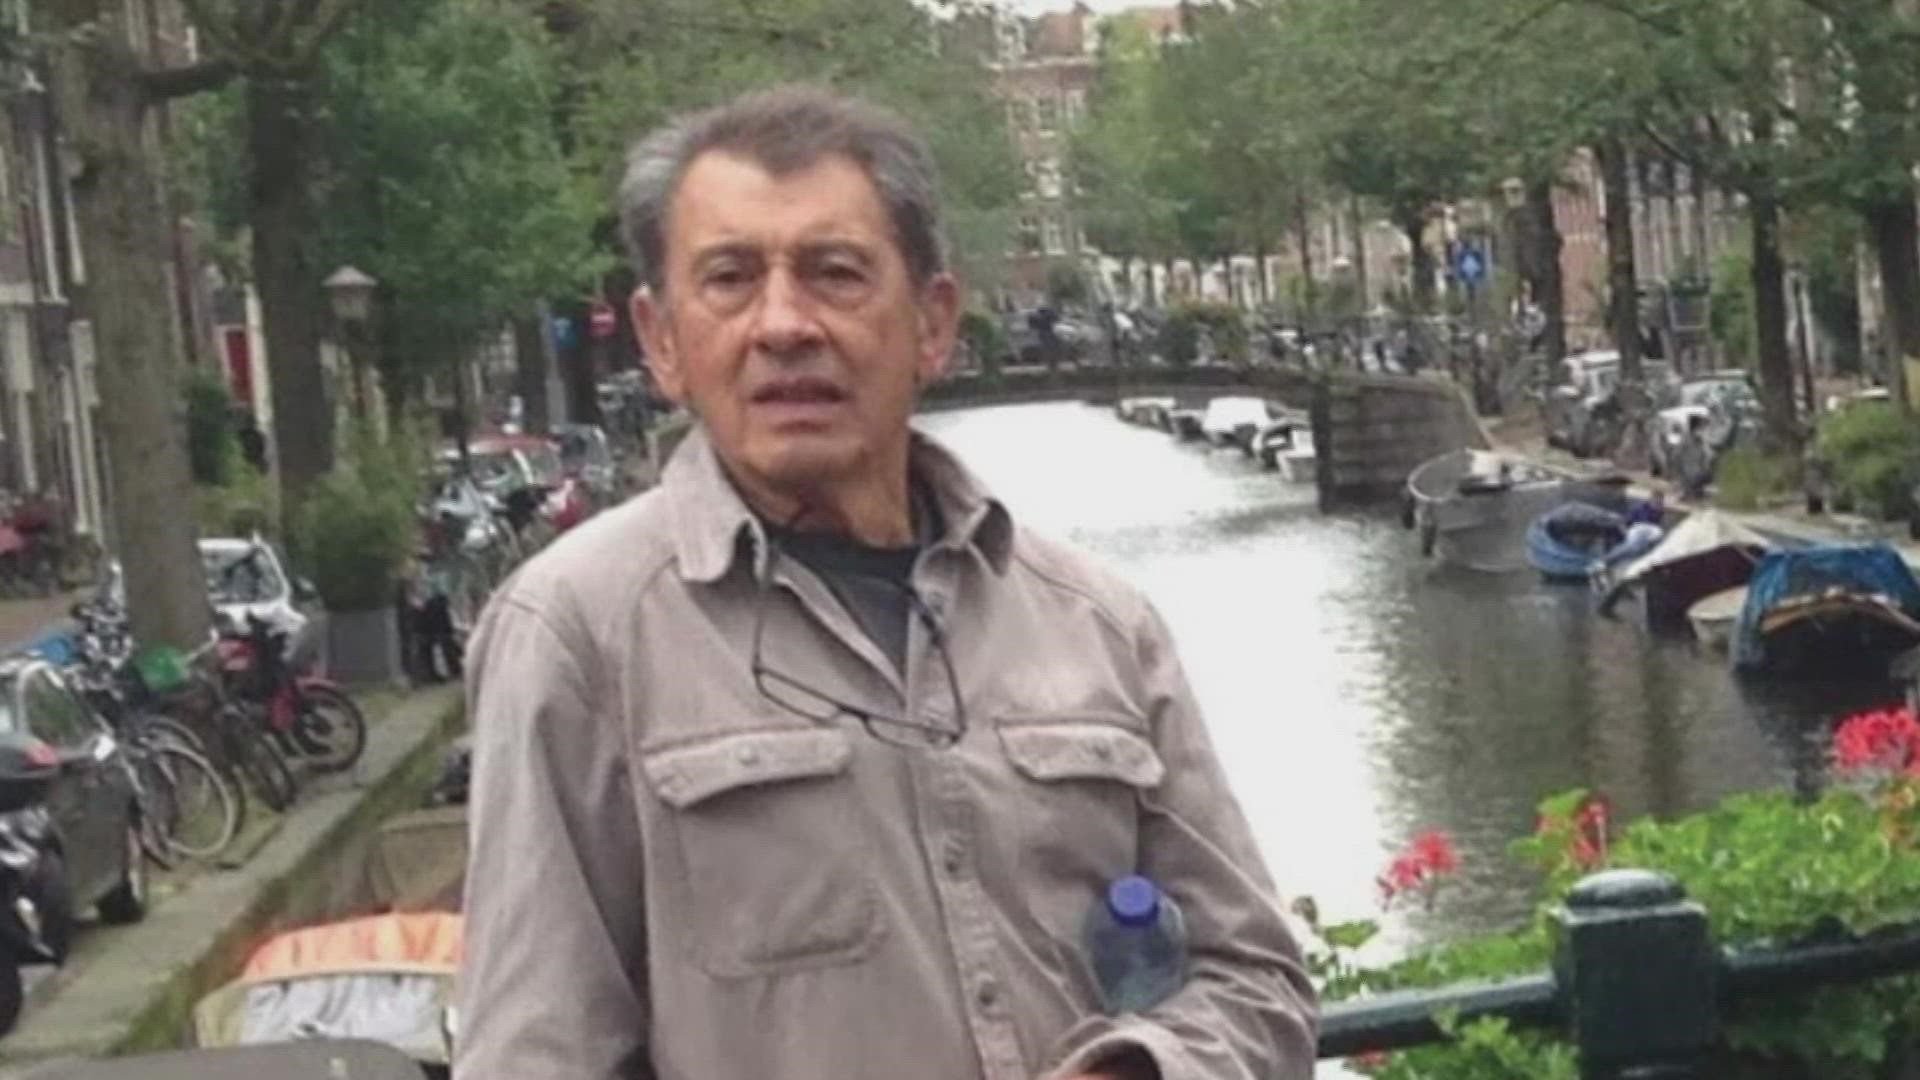 A Kent woman is pleading for help to find her husband who suffers from Alzheimer’s.